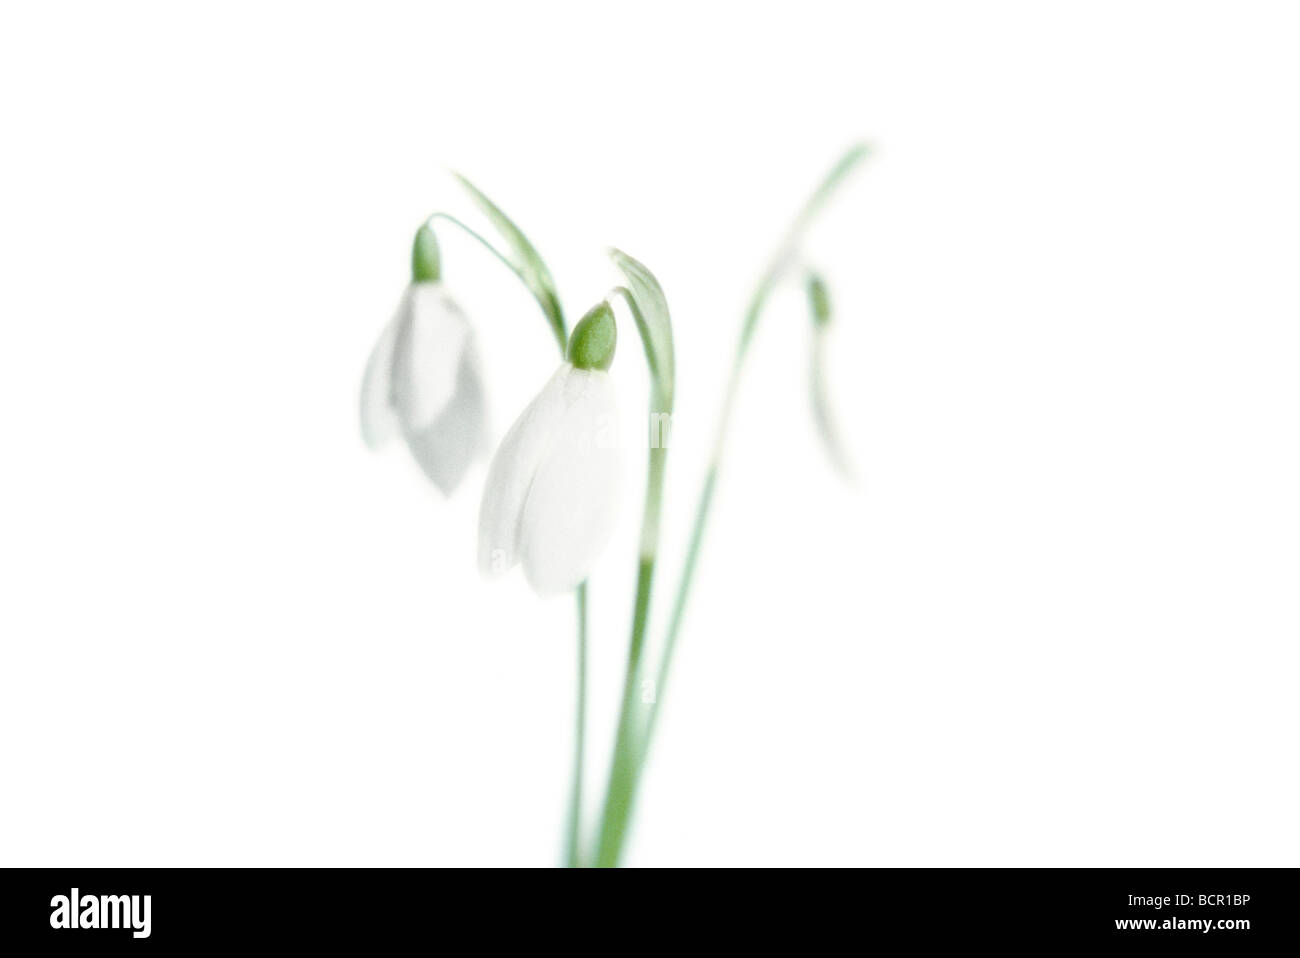 Galanthus nivalis, Snowdrop, White flowers on green stems against a white background. Stock Photo